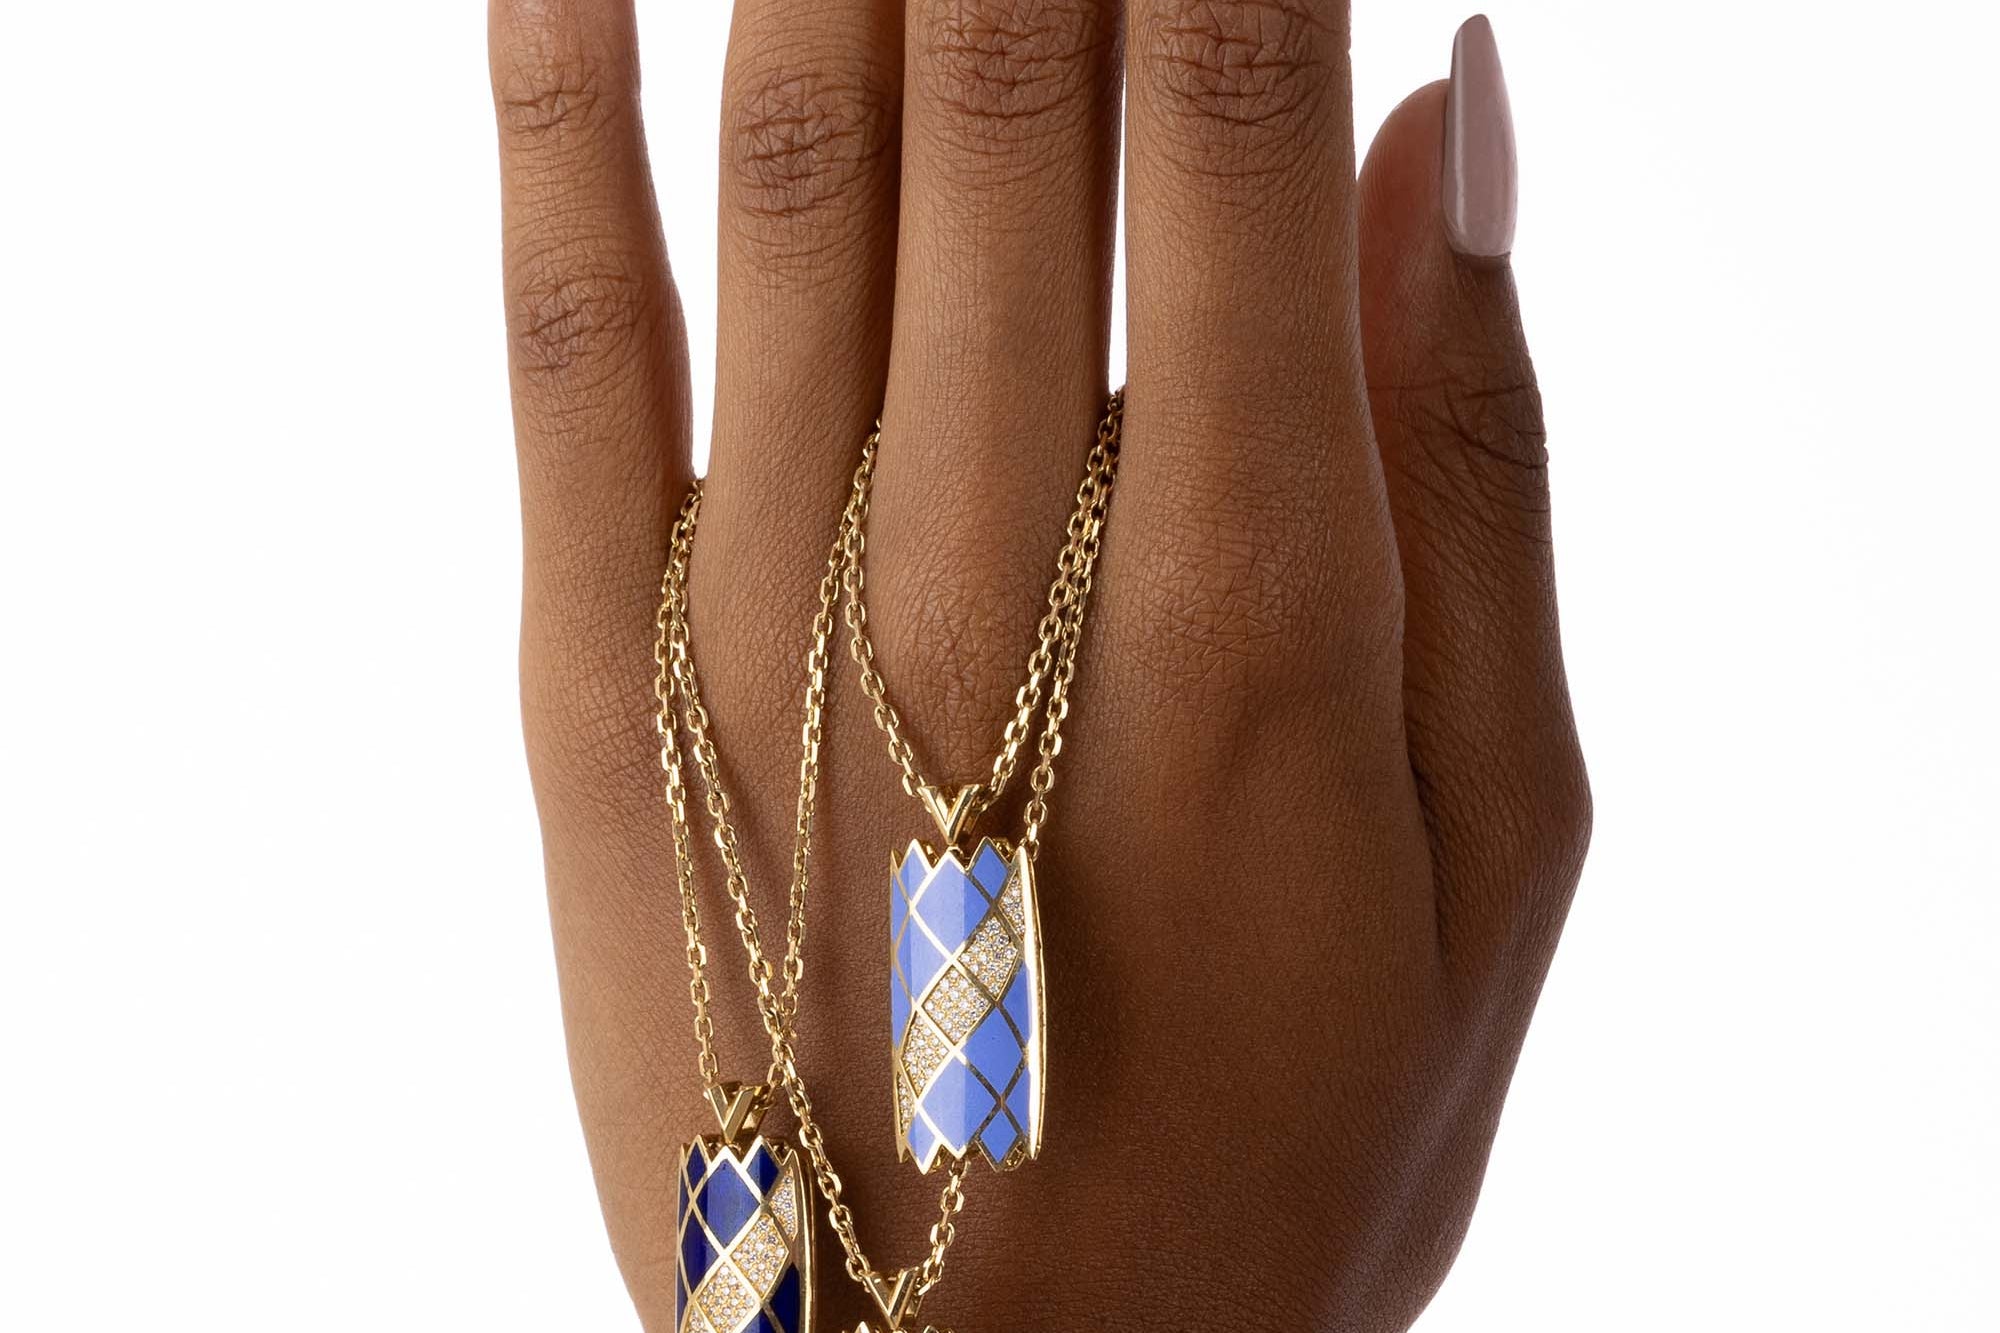 Three Castle Necklaces in light blue, dark blue, and red are draped over a model’s hand